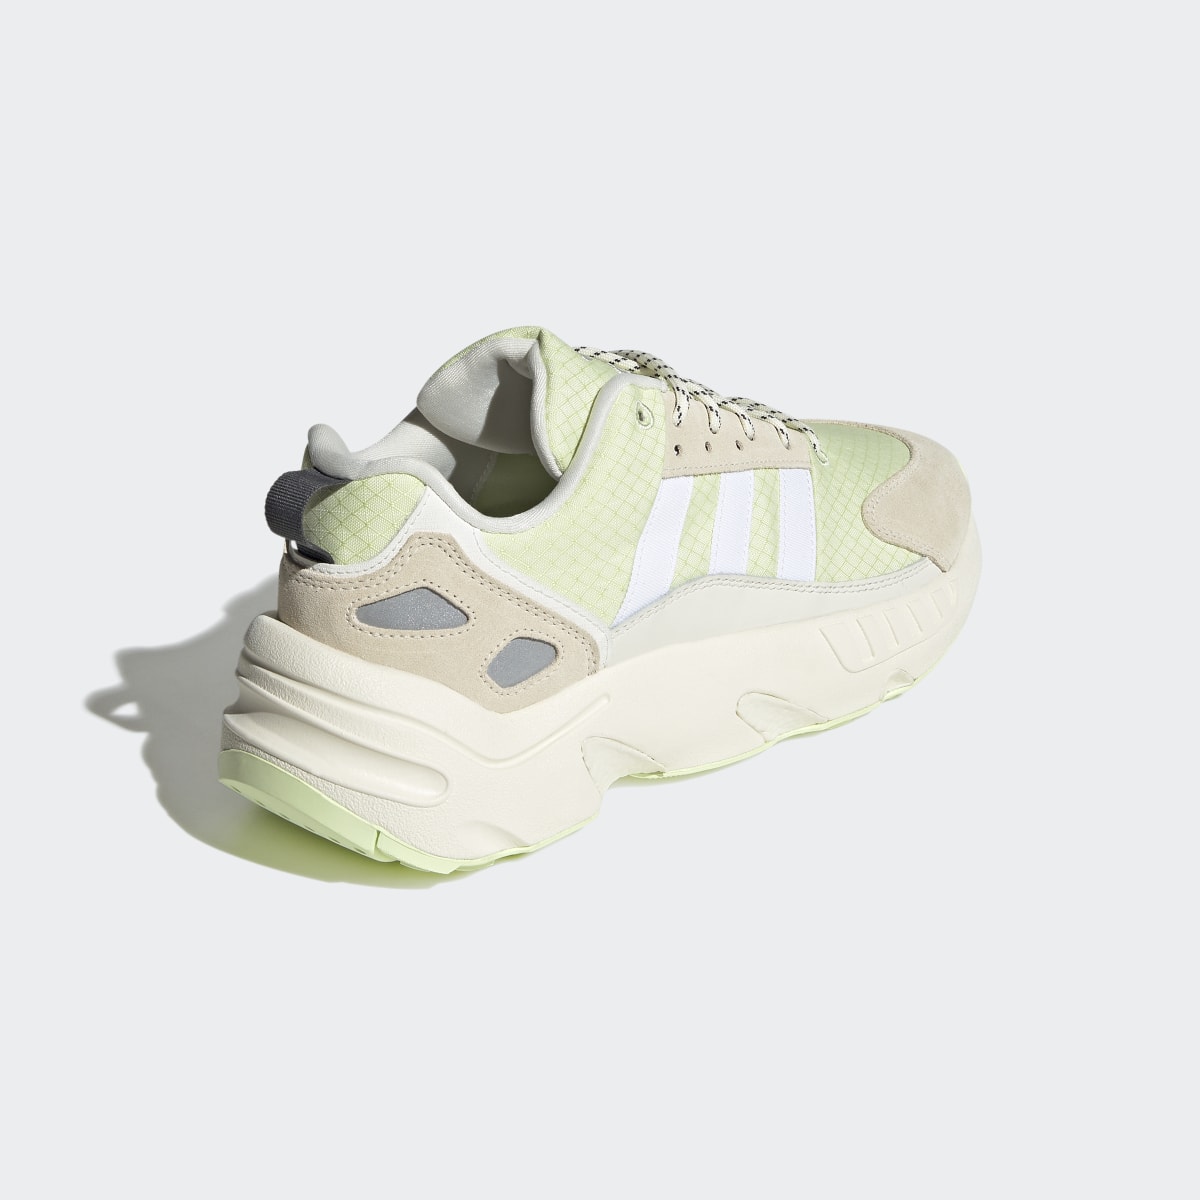 Adidas ZX 22 BOOST Shoes. 6